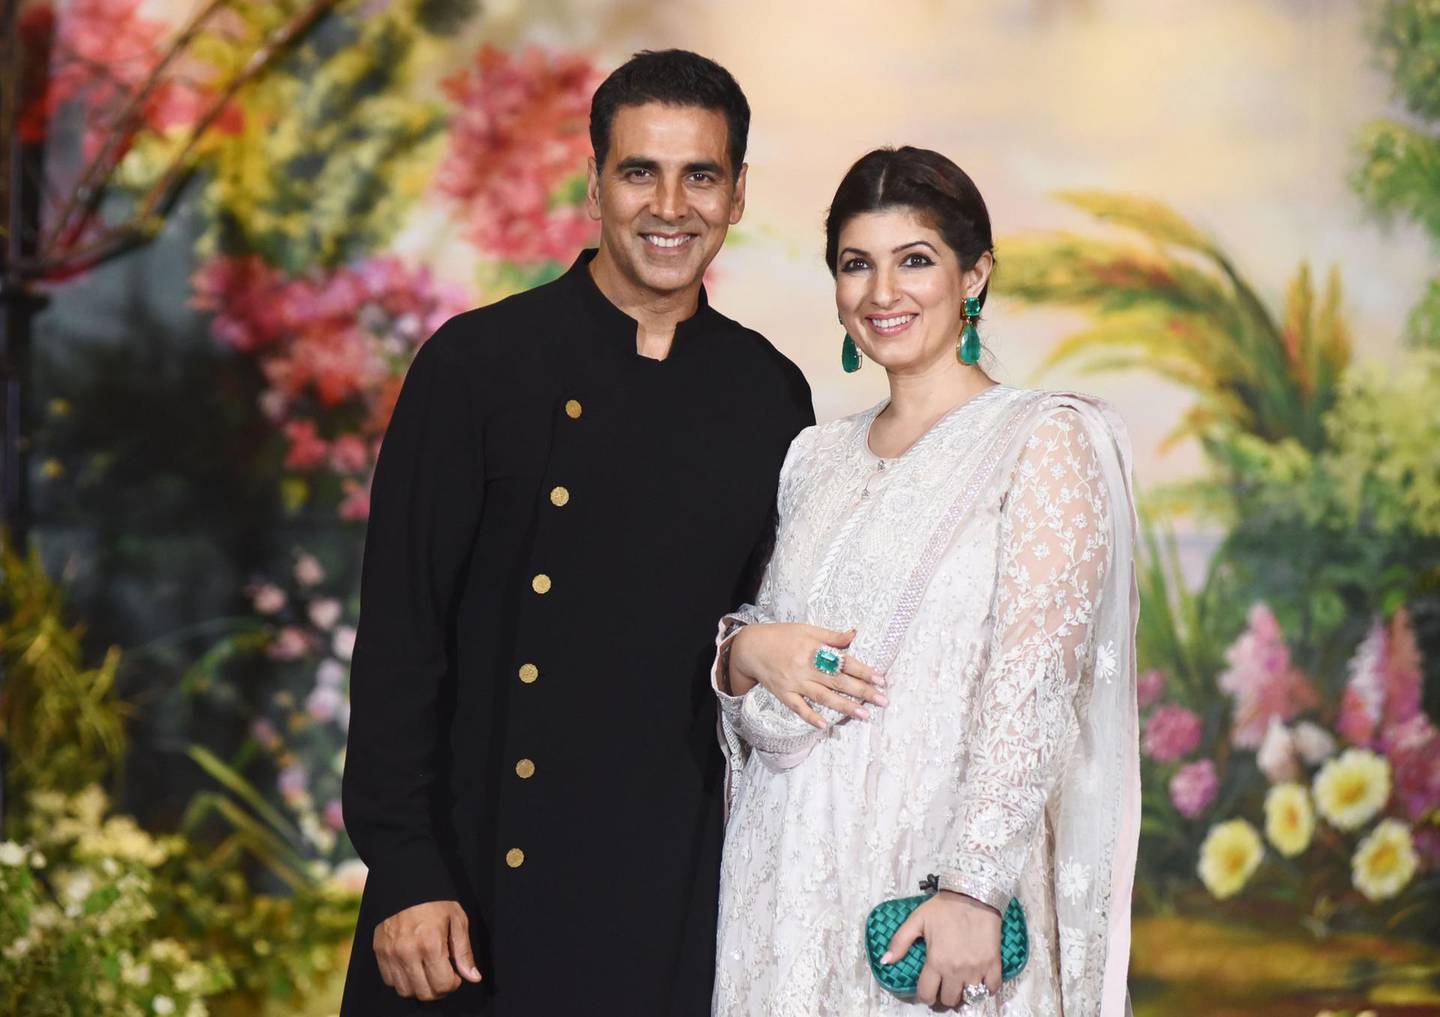 Indian Bollywood actors Akshay Kumar and his wife Twinkle Khanna pose for a picture during the wedding reception of actress Sonam Kapoor and businessman Anand Ahuja in Mumbai late on May 8, 2018. / AFP PHOTO / Sujit Jaiswal